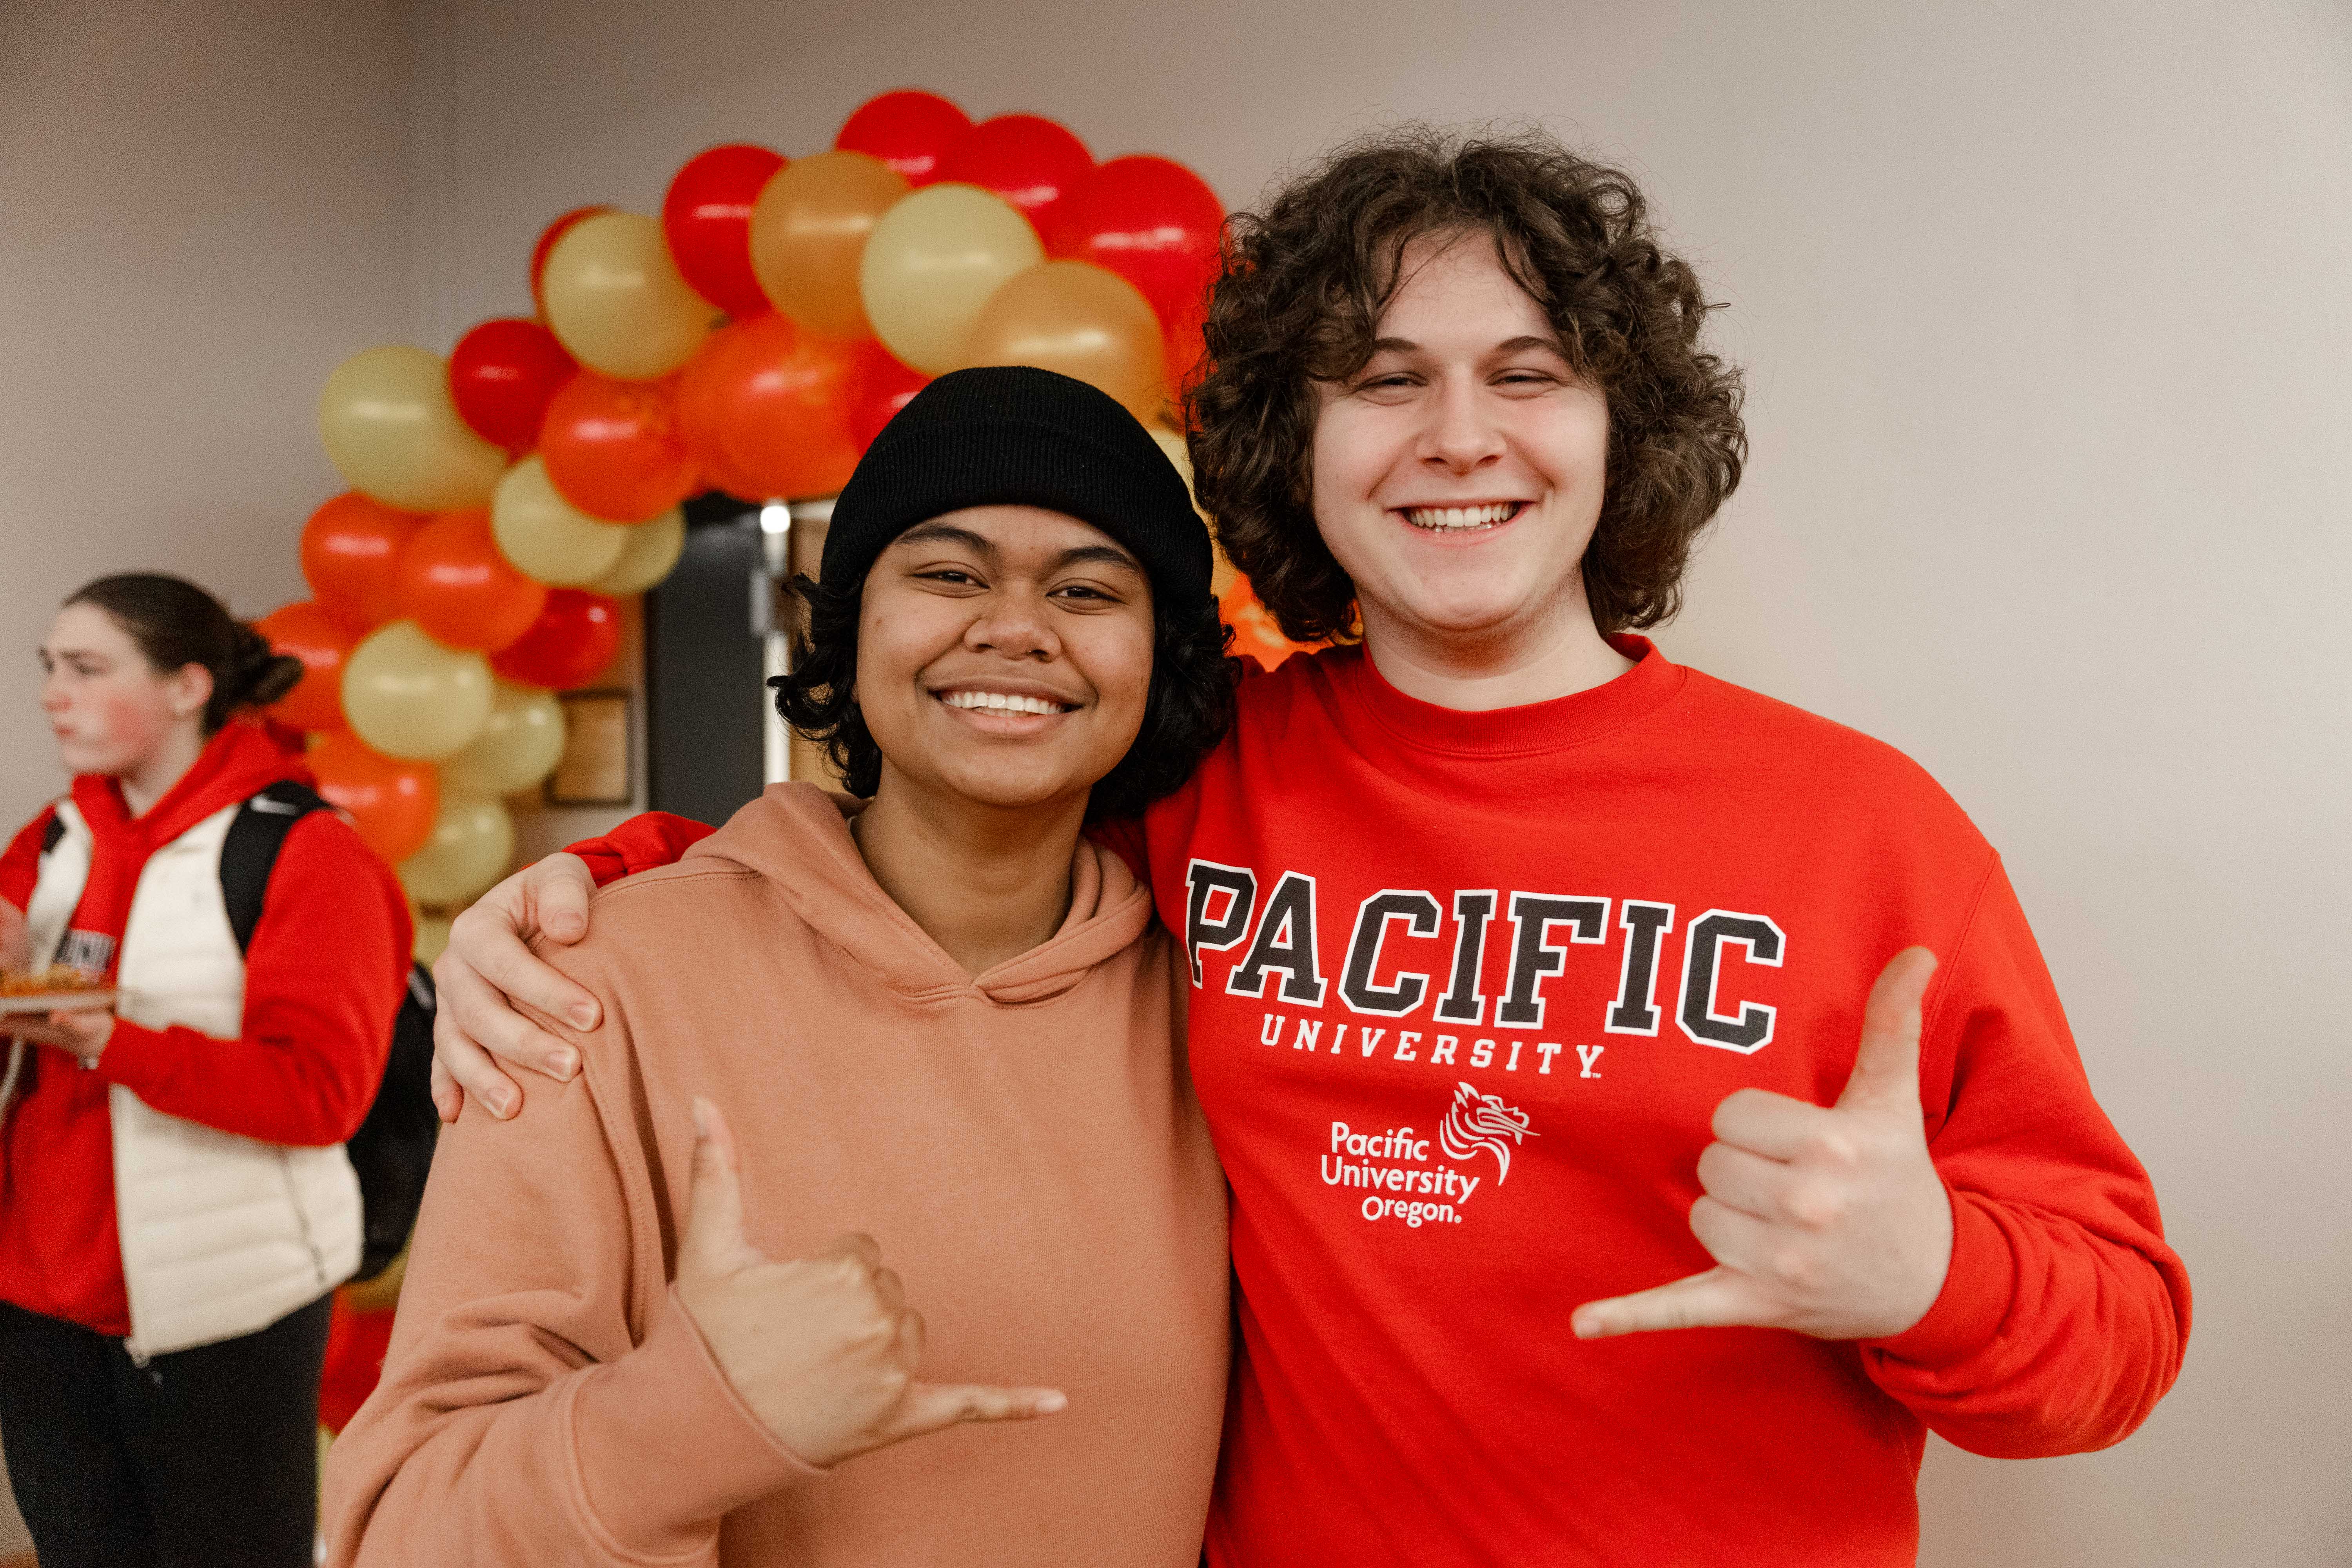 Two students pose for a photo during a Lunar New Year celebration.